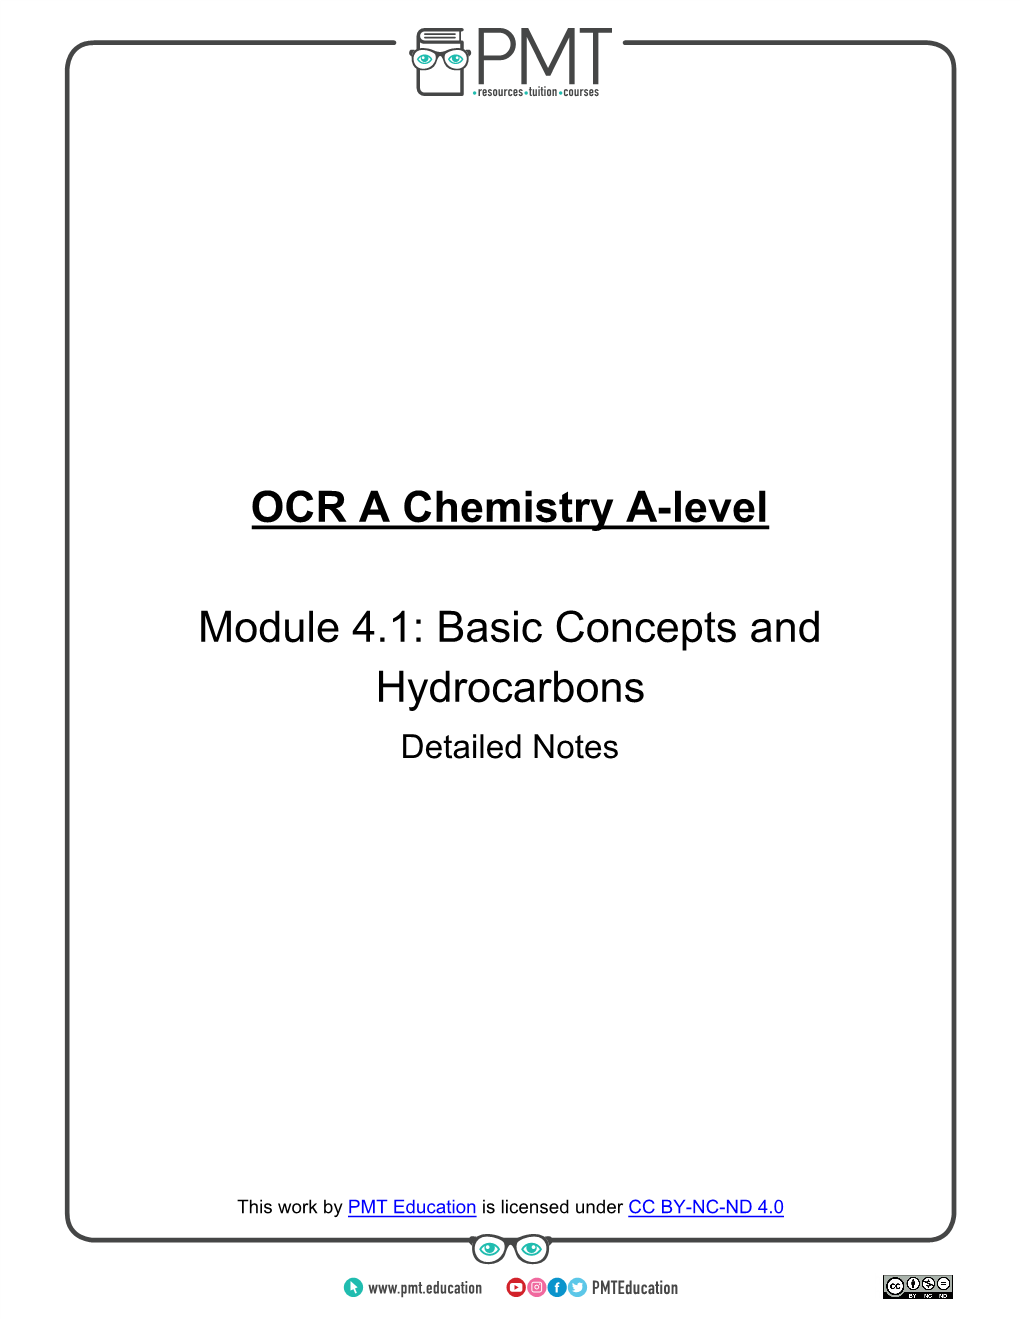 Module 4.1: Basic Concepts and Hydrocarbons Detailed Notes